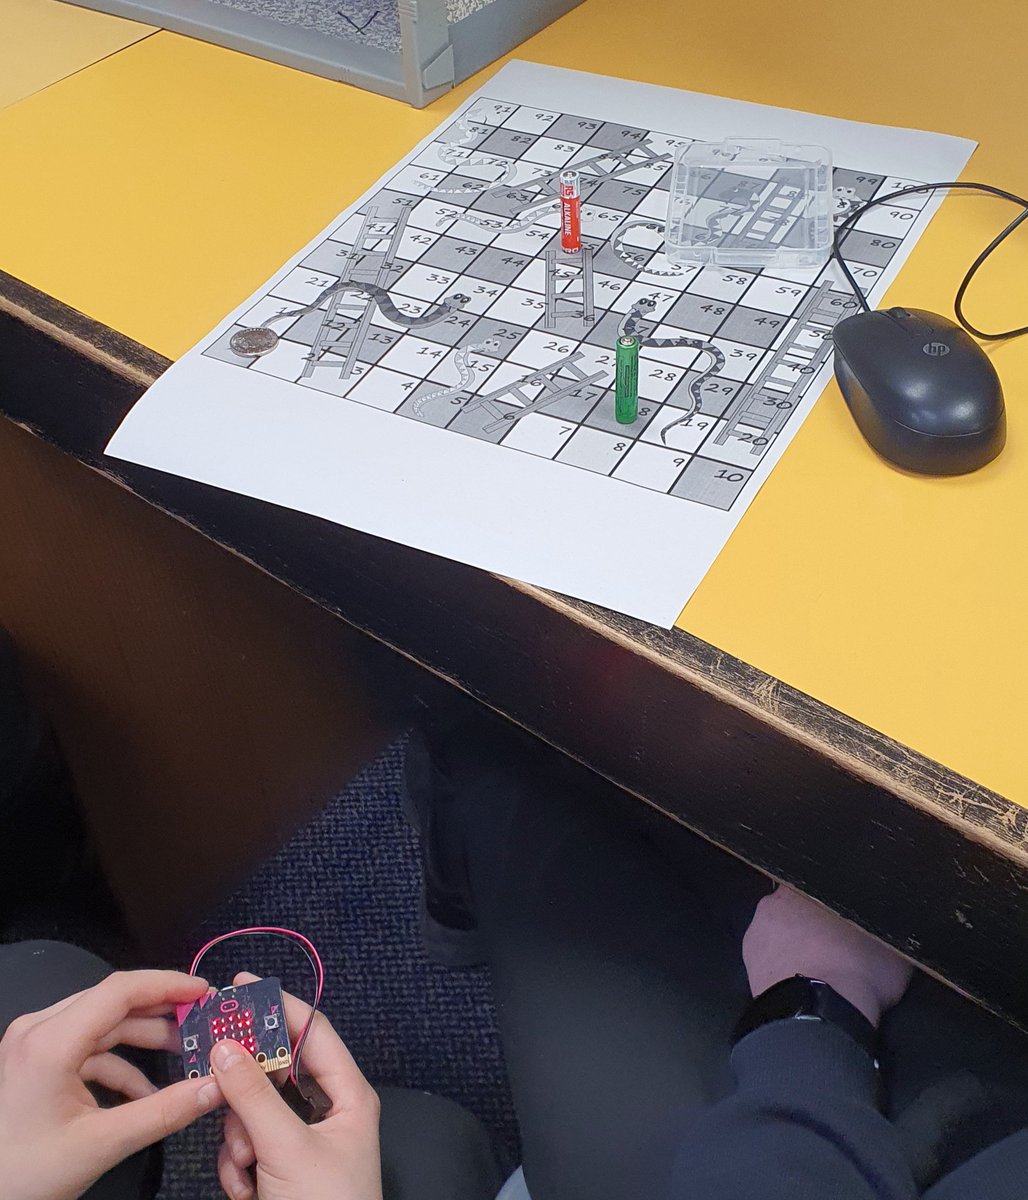 @gacomputing s2 pupils learning all about selection and random on the BBC microbit. Used microbit classroom to give them the blocks and they put it all together, downloaded to a microbit and enjoyed a game of snakes and ladders using the microbit as a dice!